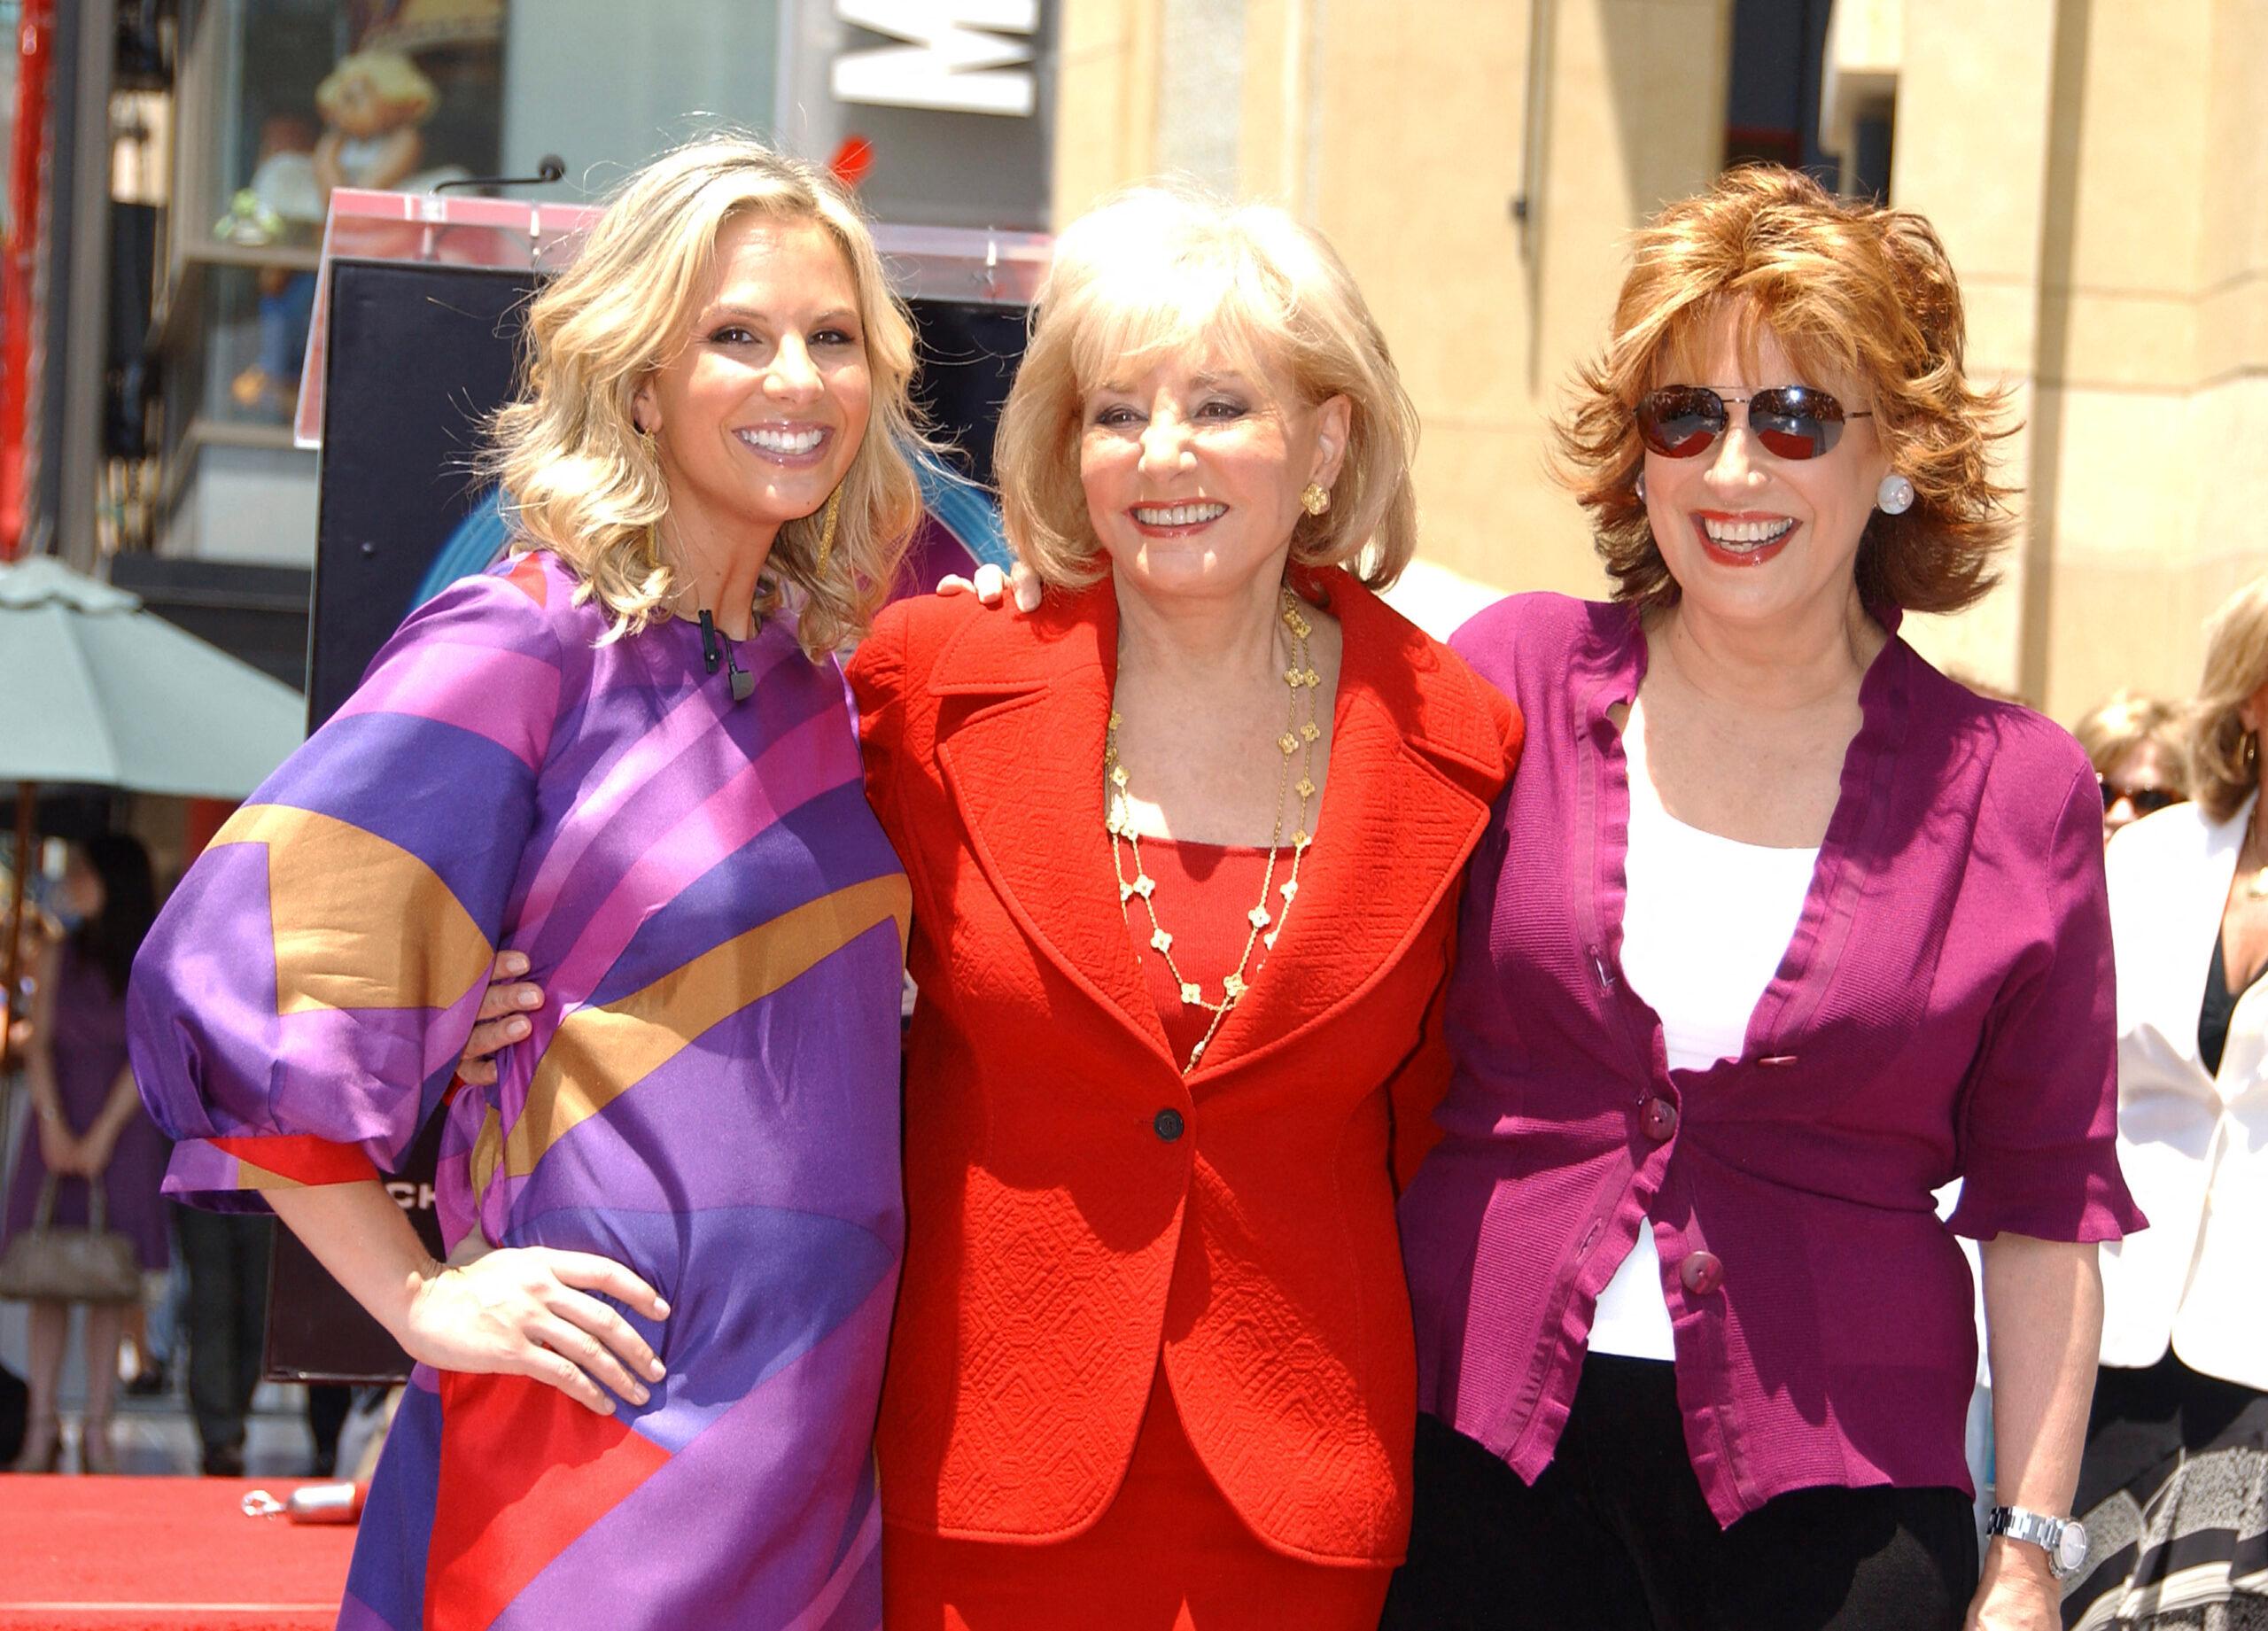 Barbara Walters and "The View" cohosts